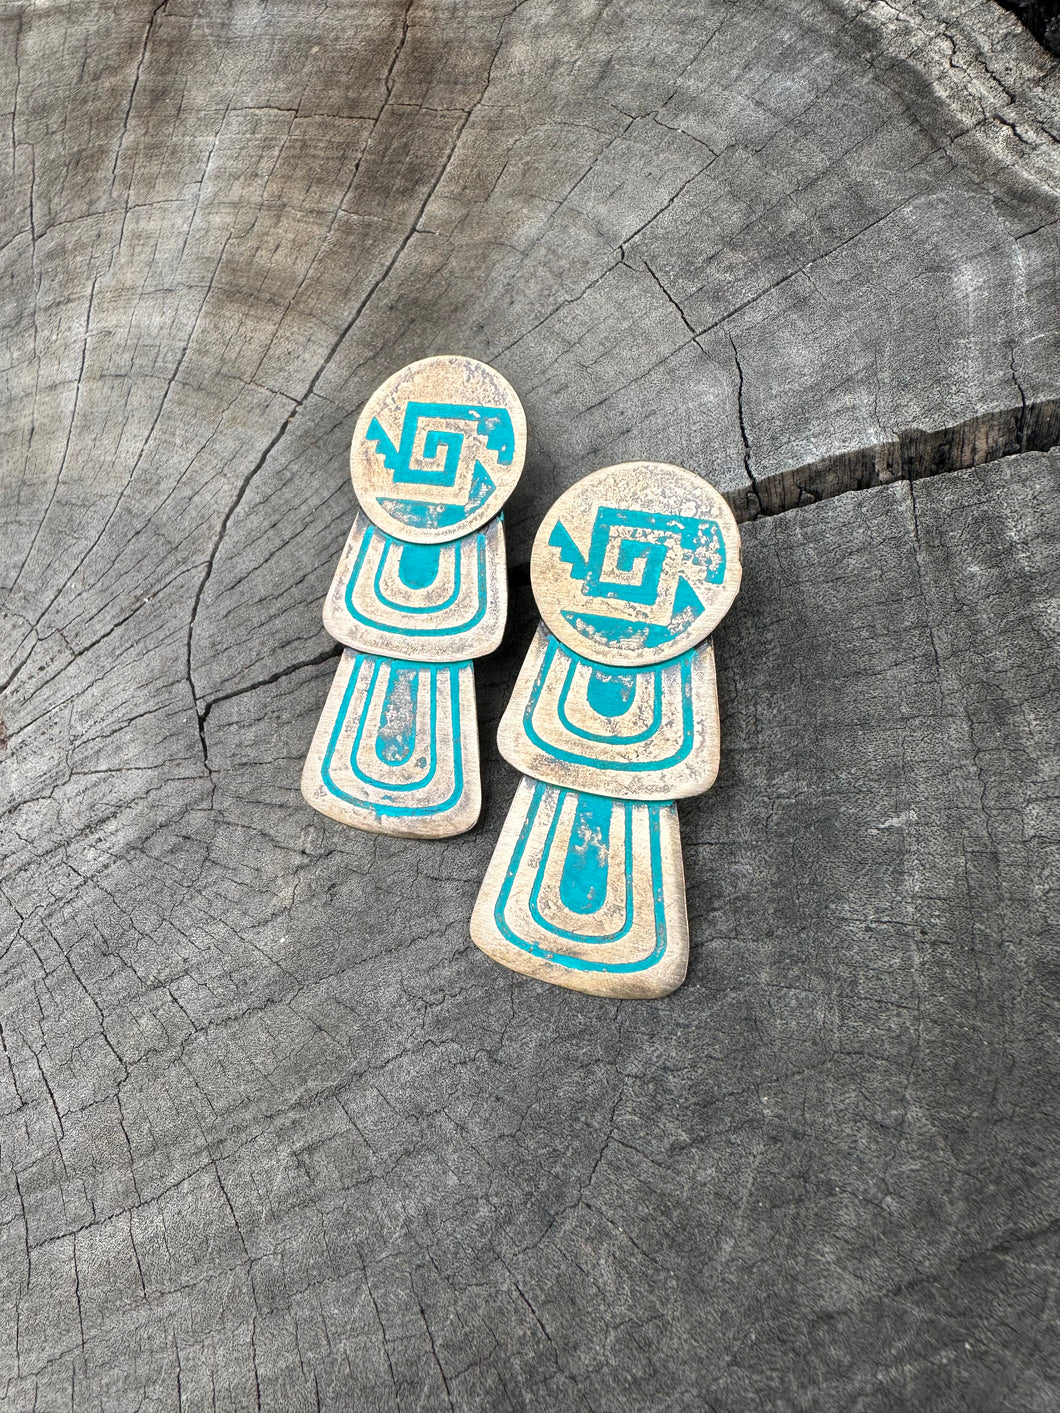 Ximalli post earrings with teal